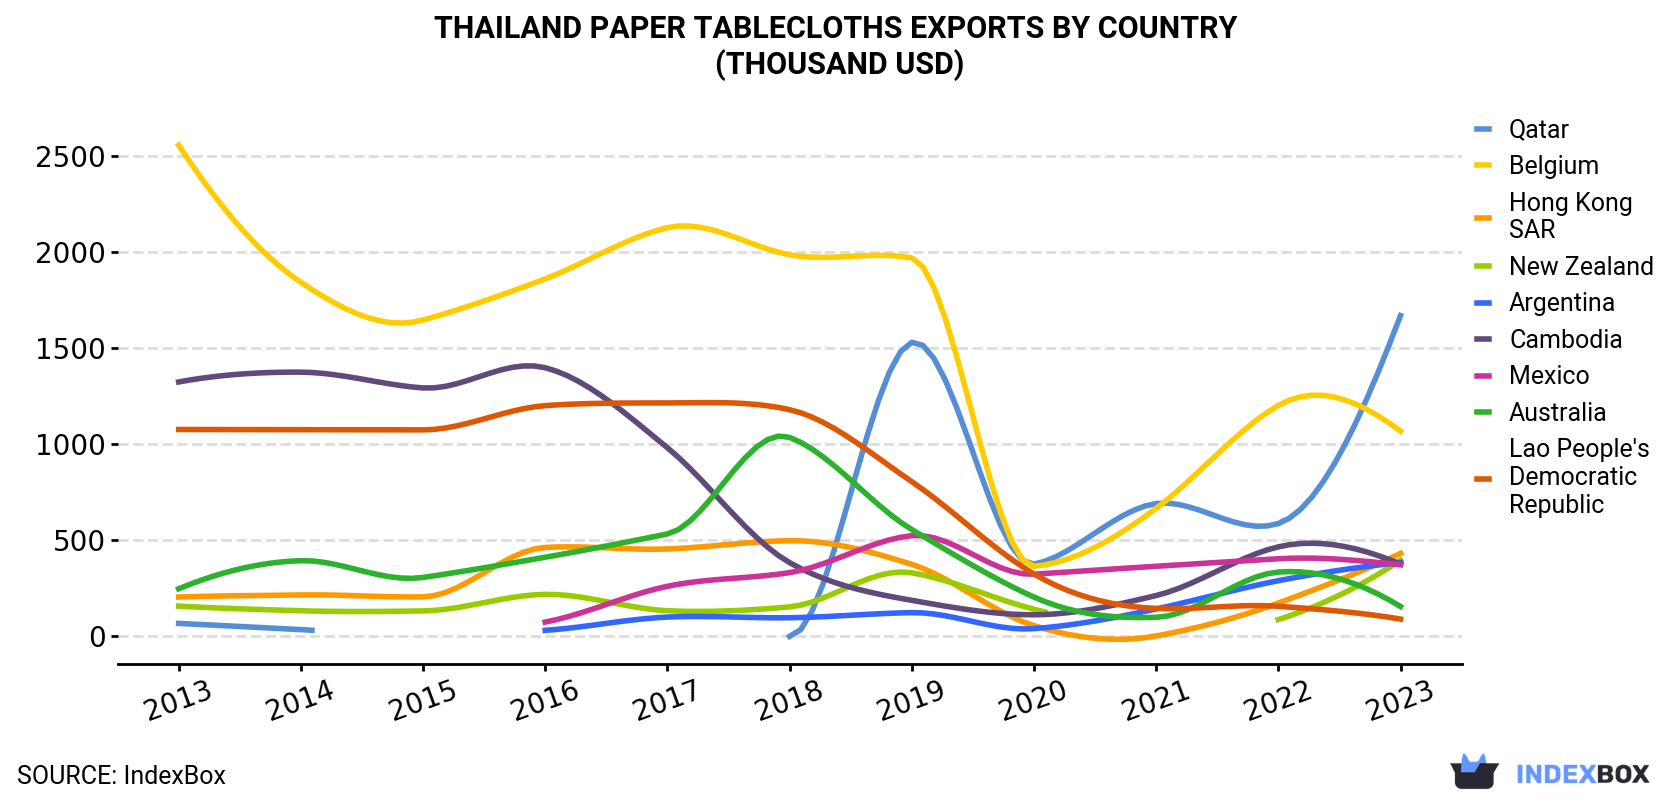 Thailand Paper Tablecloths Exports By Country (Thousand USD)